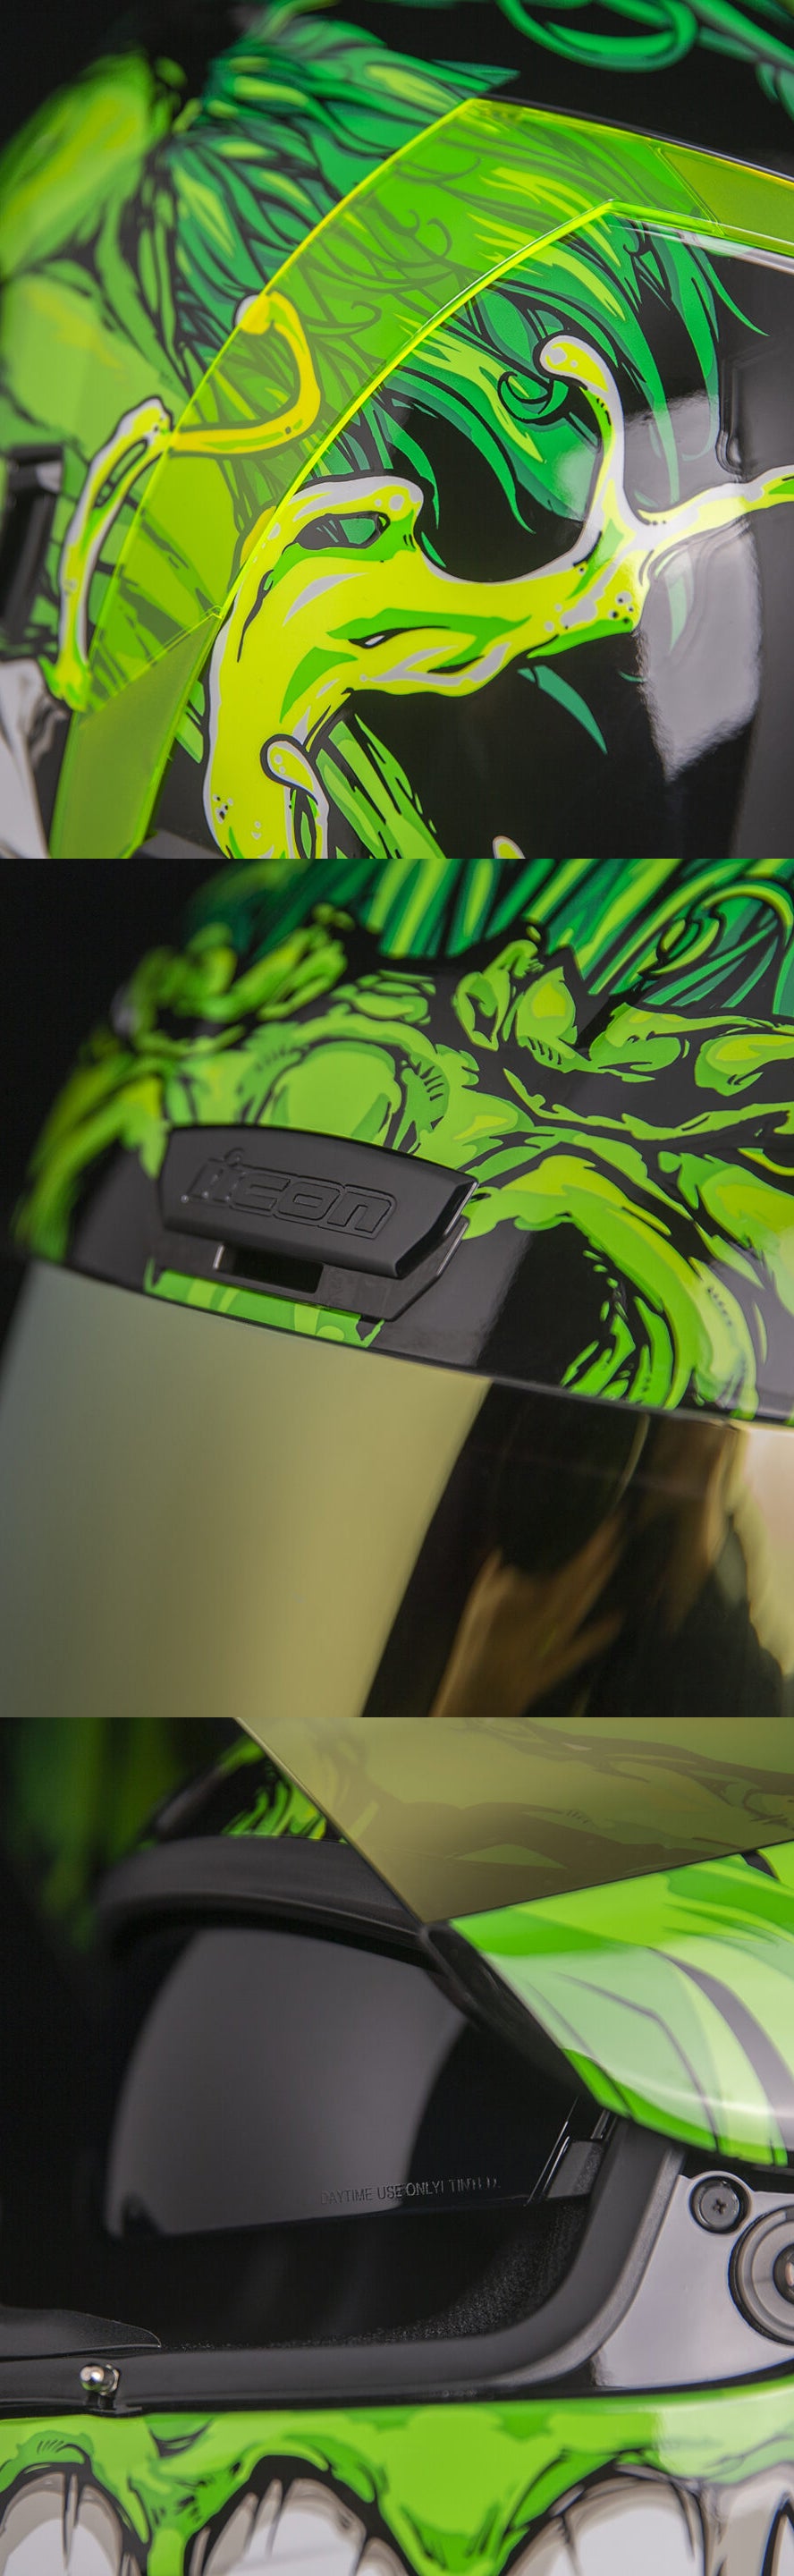 Icon Racing Motorcycle Helmets | Introducing The All New MANIK'R - GREEN